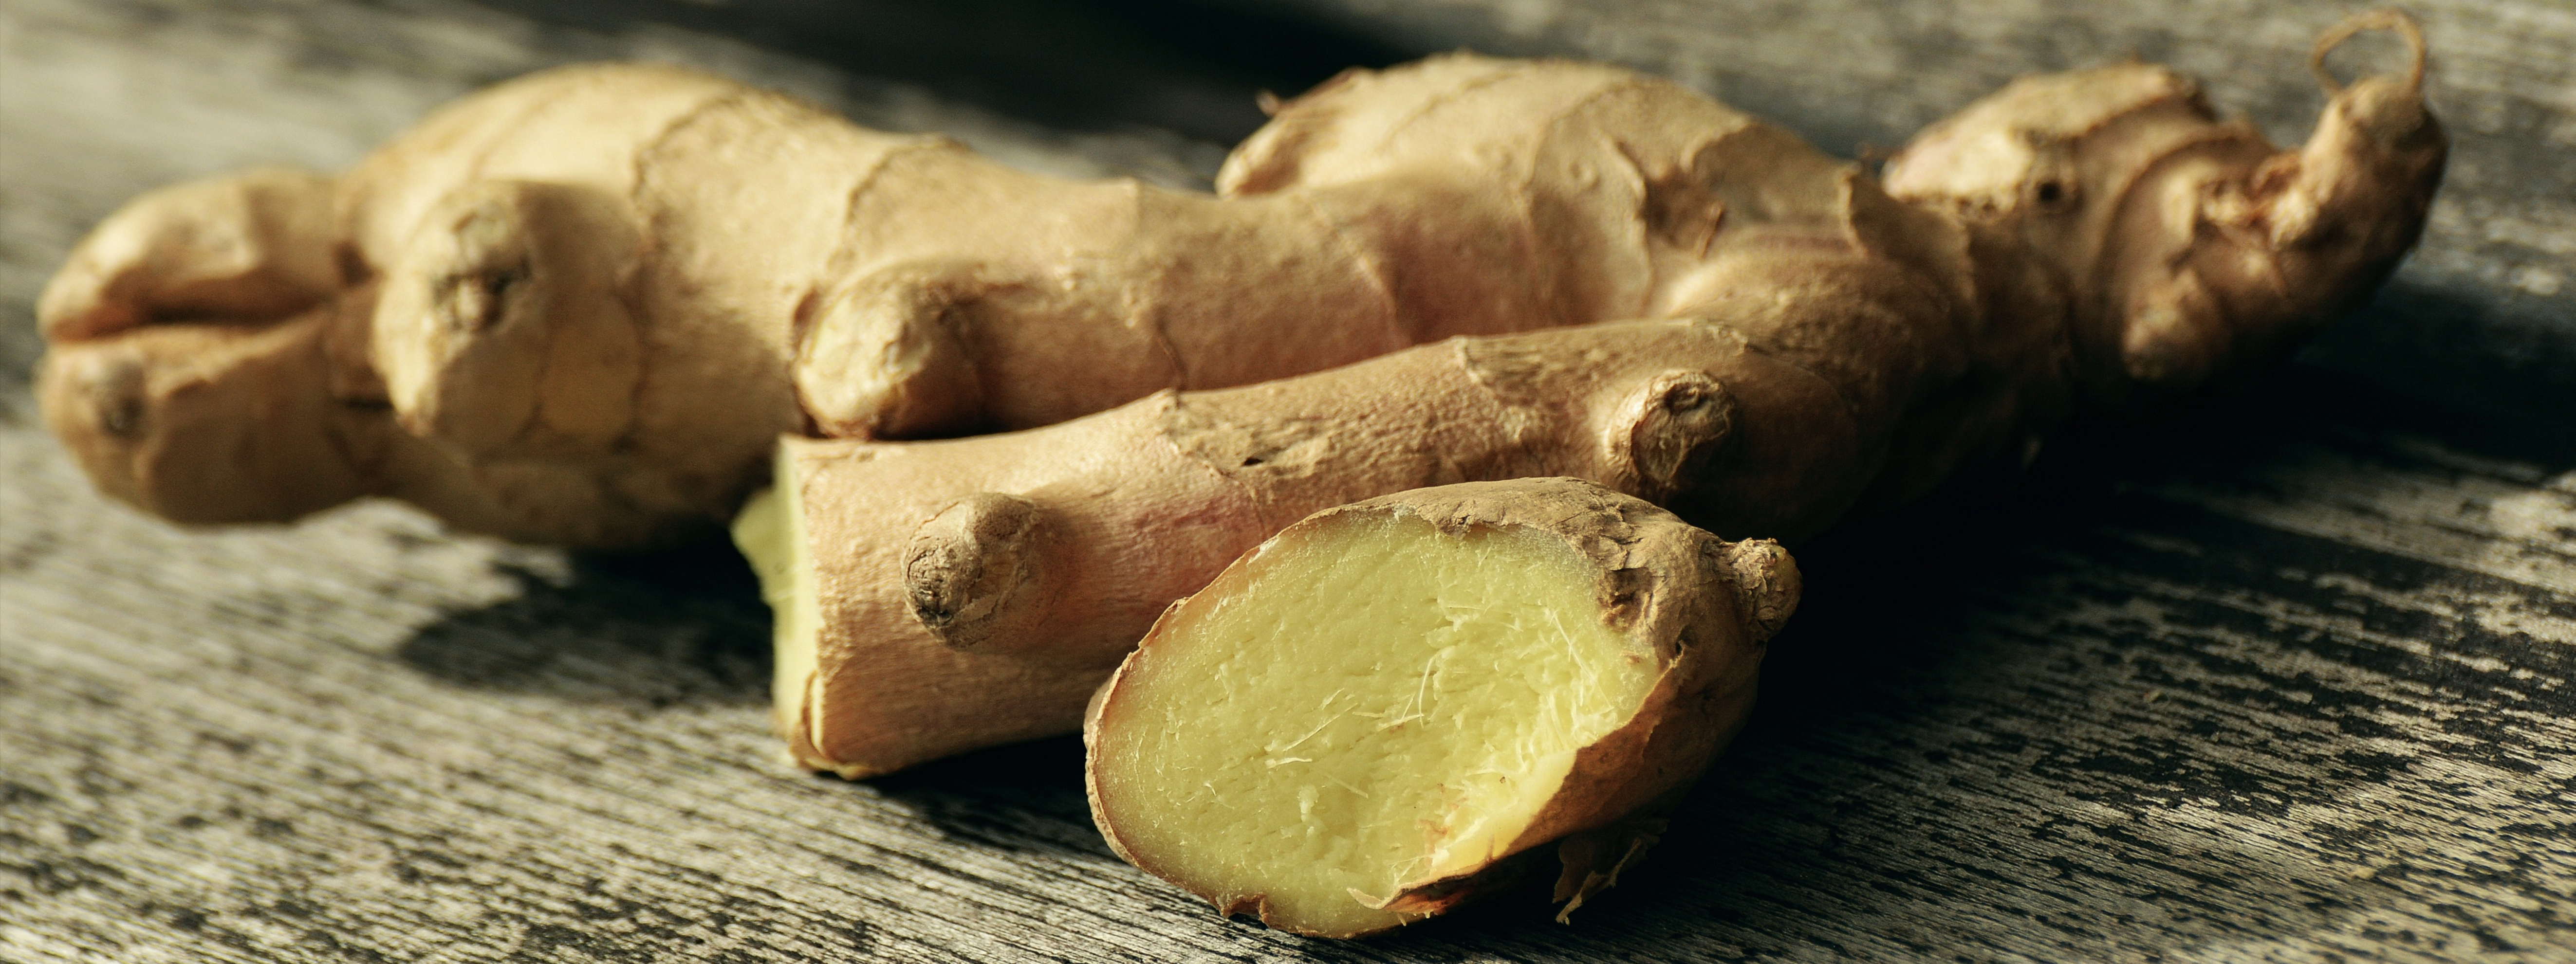 Nanoencapsulated ginger extract for food applications